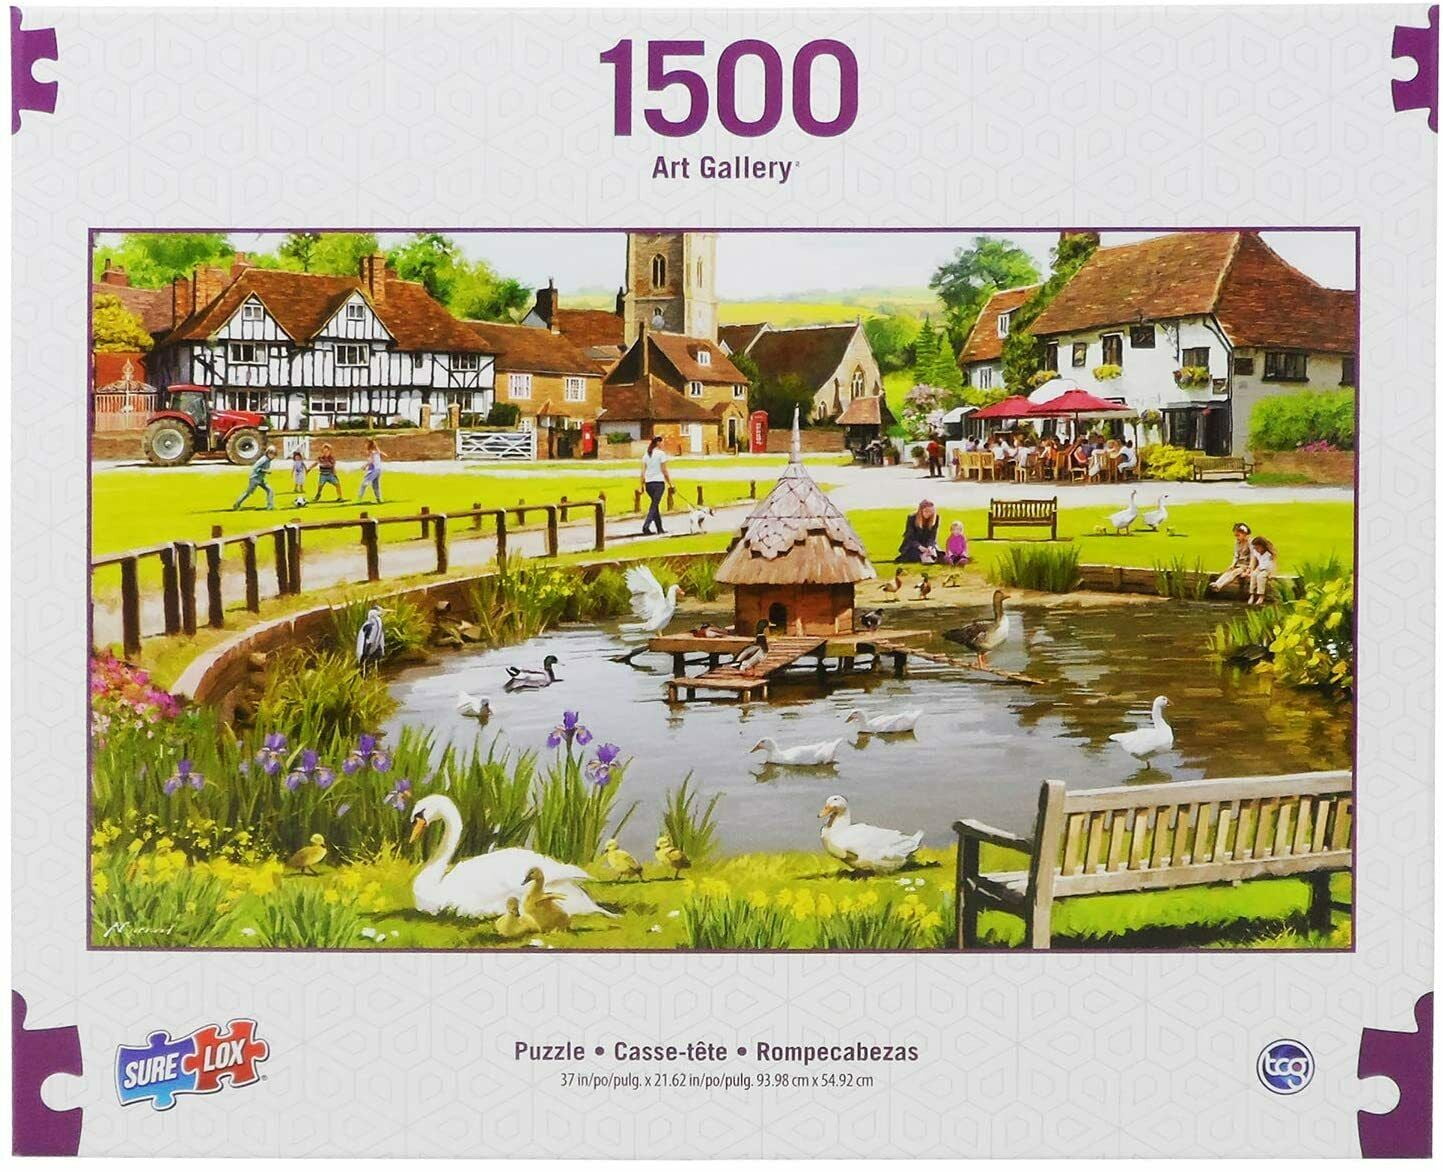 37" x 21.62" 1,500 Piece Jigsaw Puzzle Art Gallery Swans in The Park 